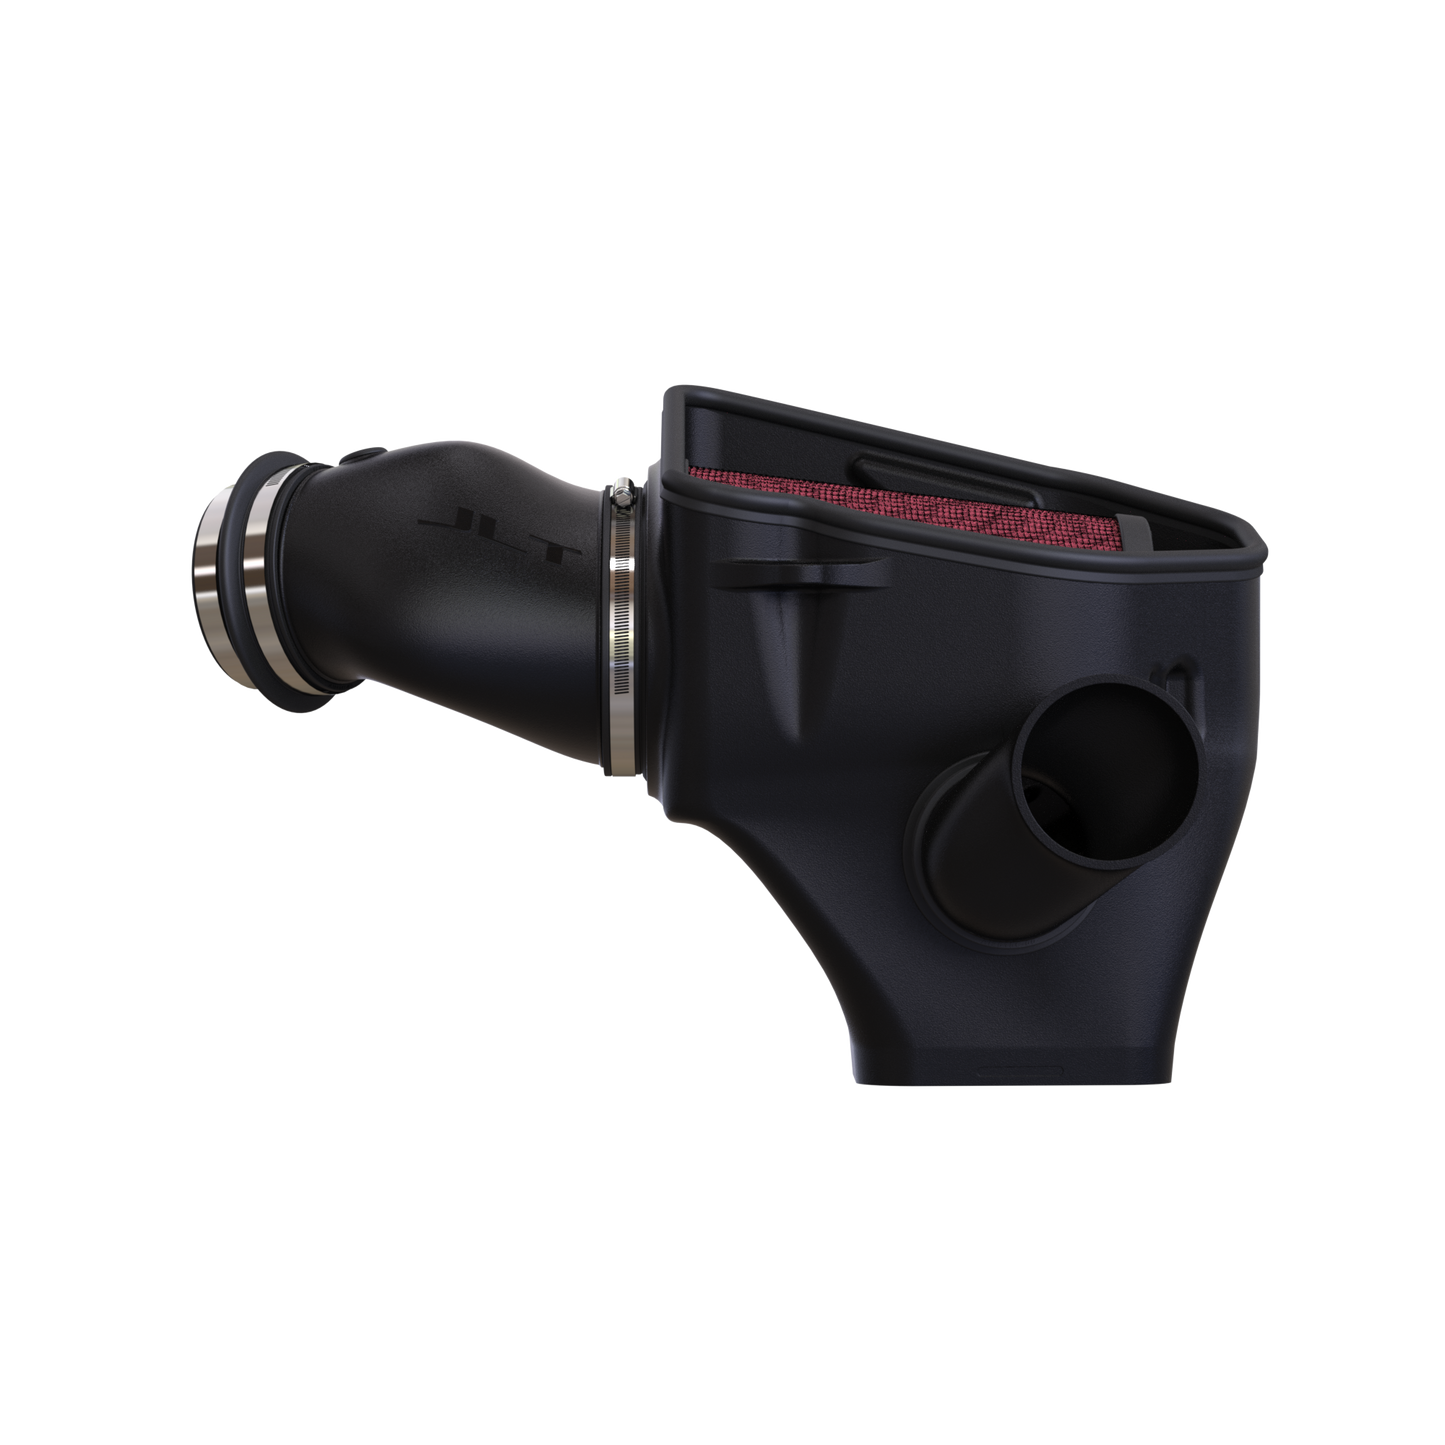 JLT Cold Air Intake for 2017-2020 Charger Hellcat & 2017-2018 Challenger Hellcat (Widebody Models Only)